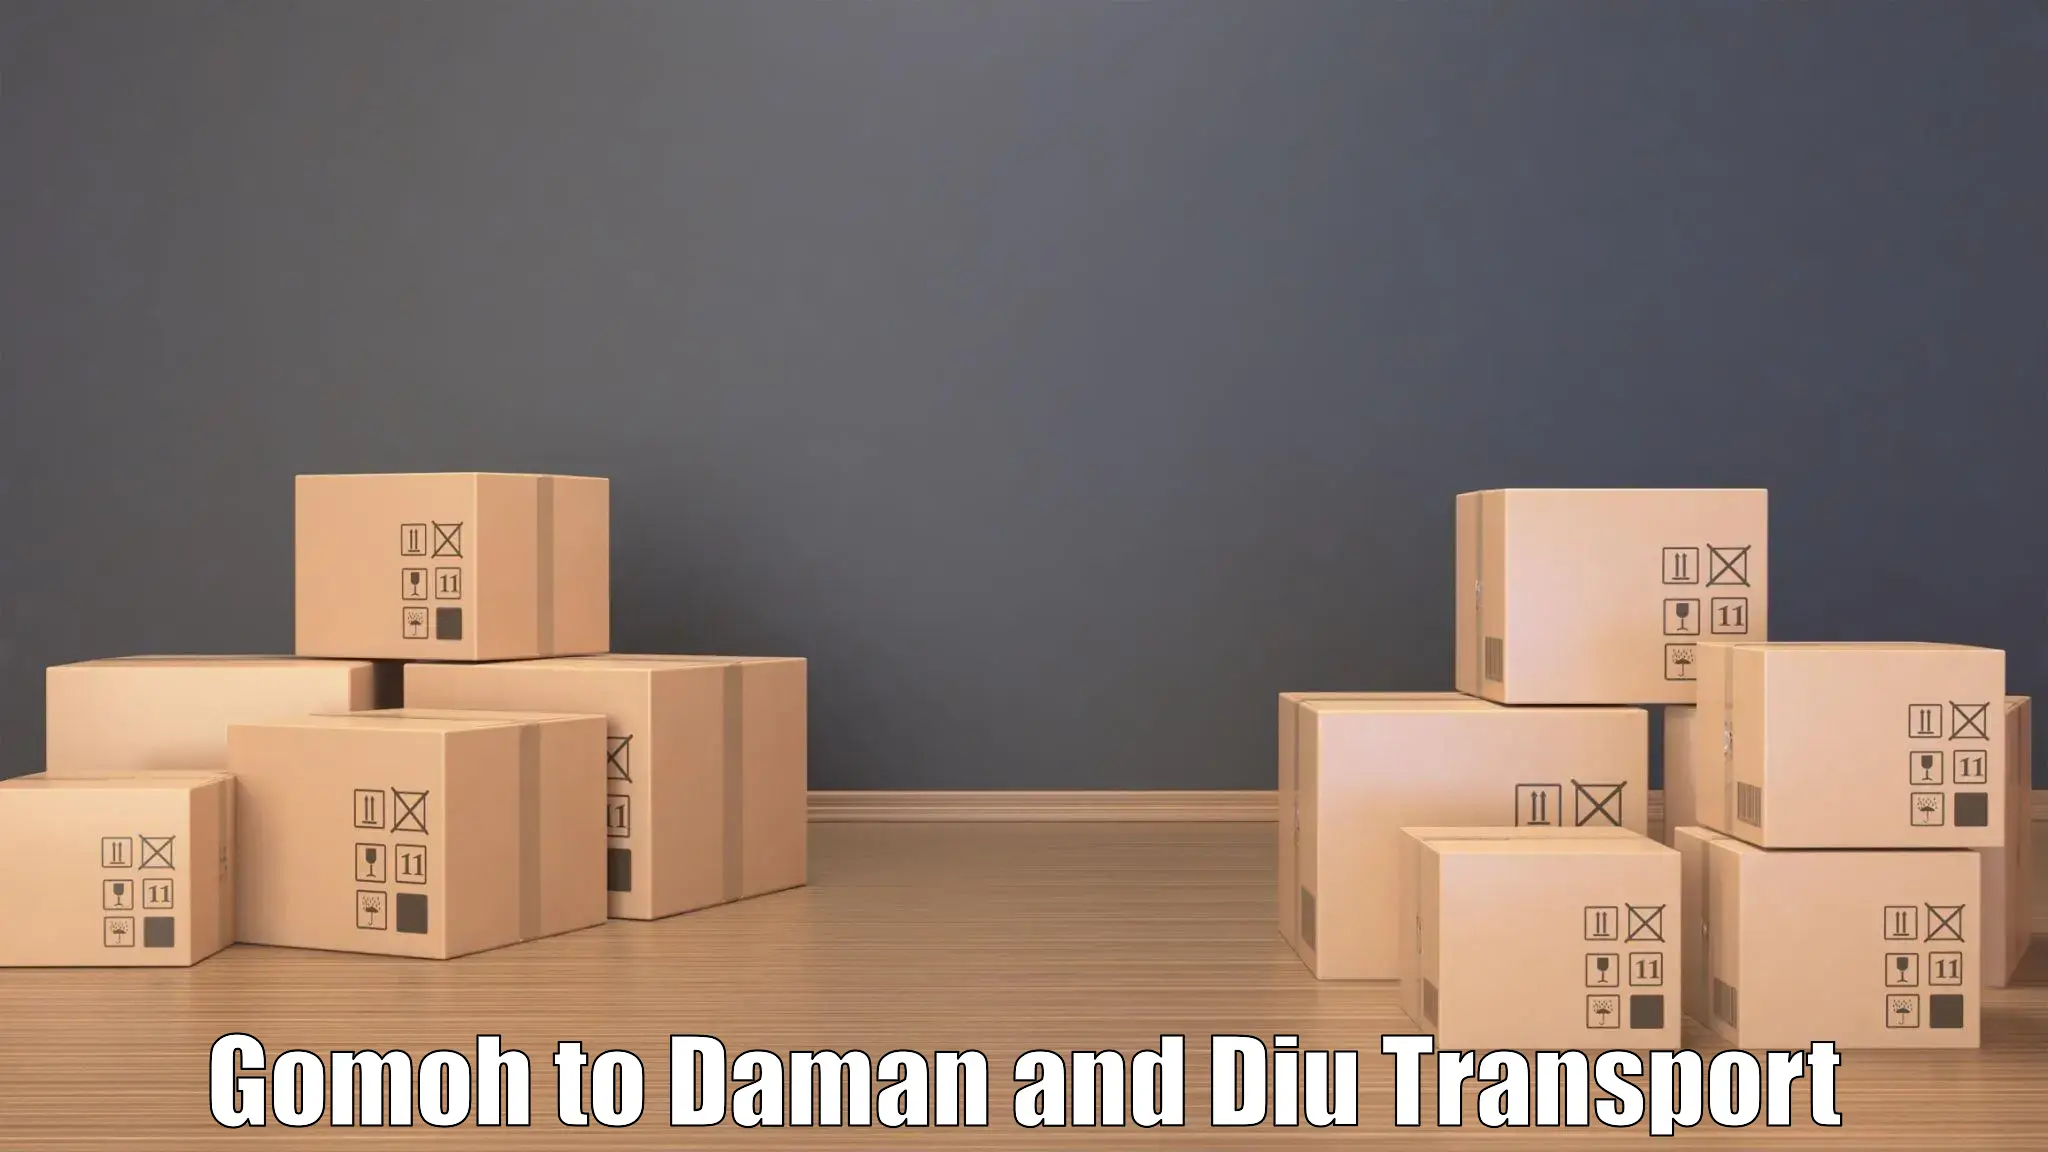 Container transport service Gomoh to Daman and Diu